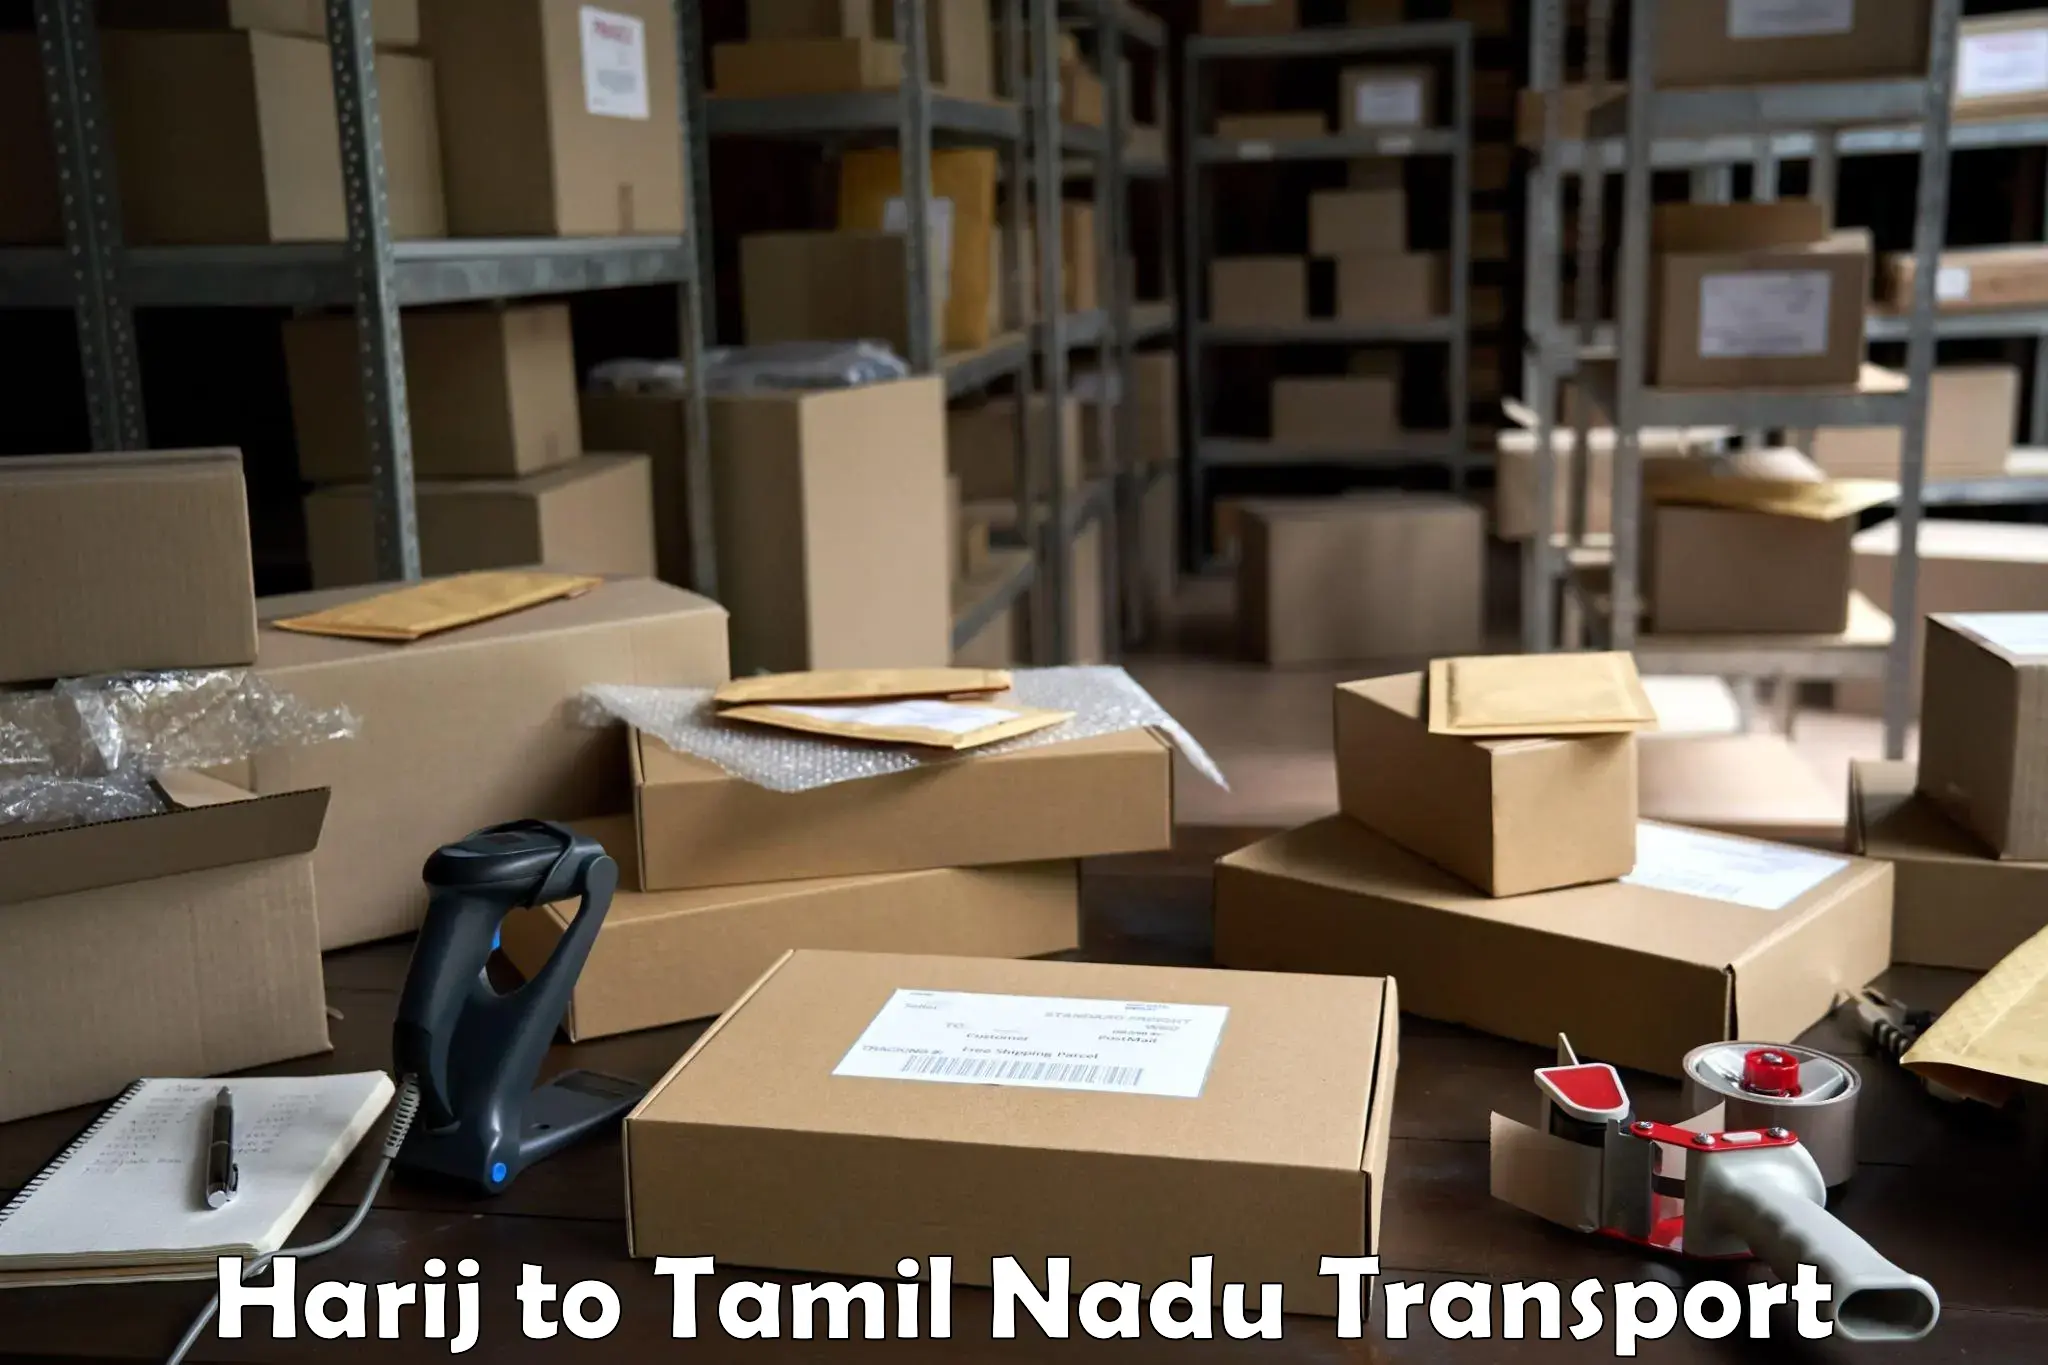 India truck logistics services Harij to Ennore Port Chennai